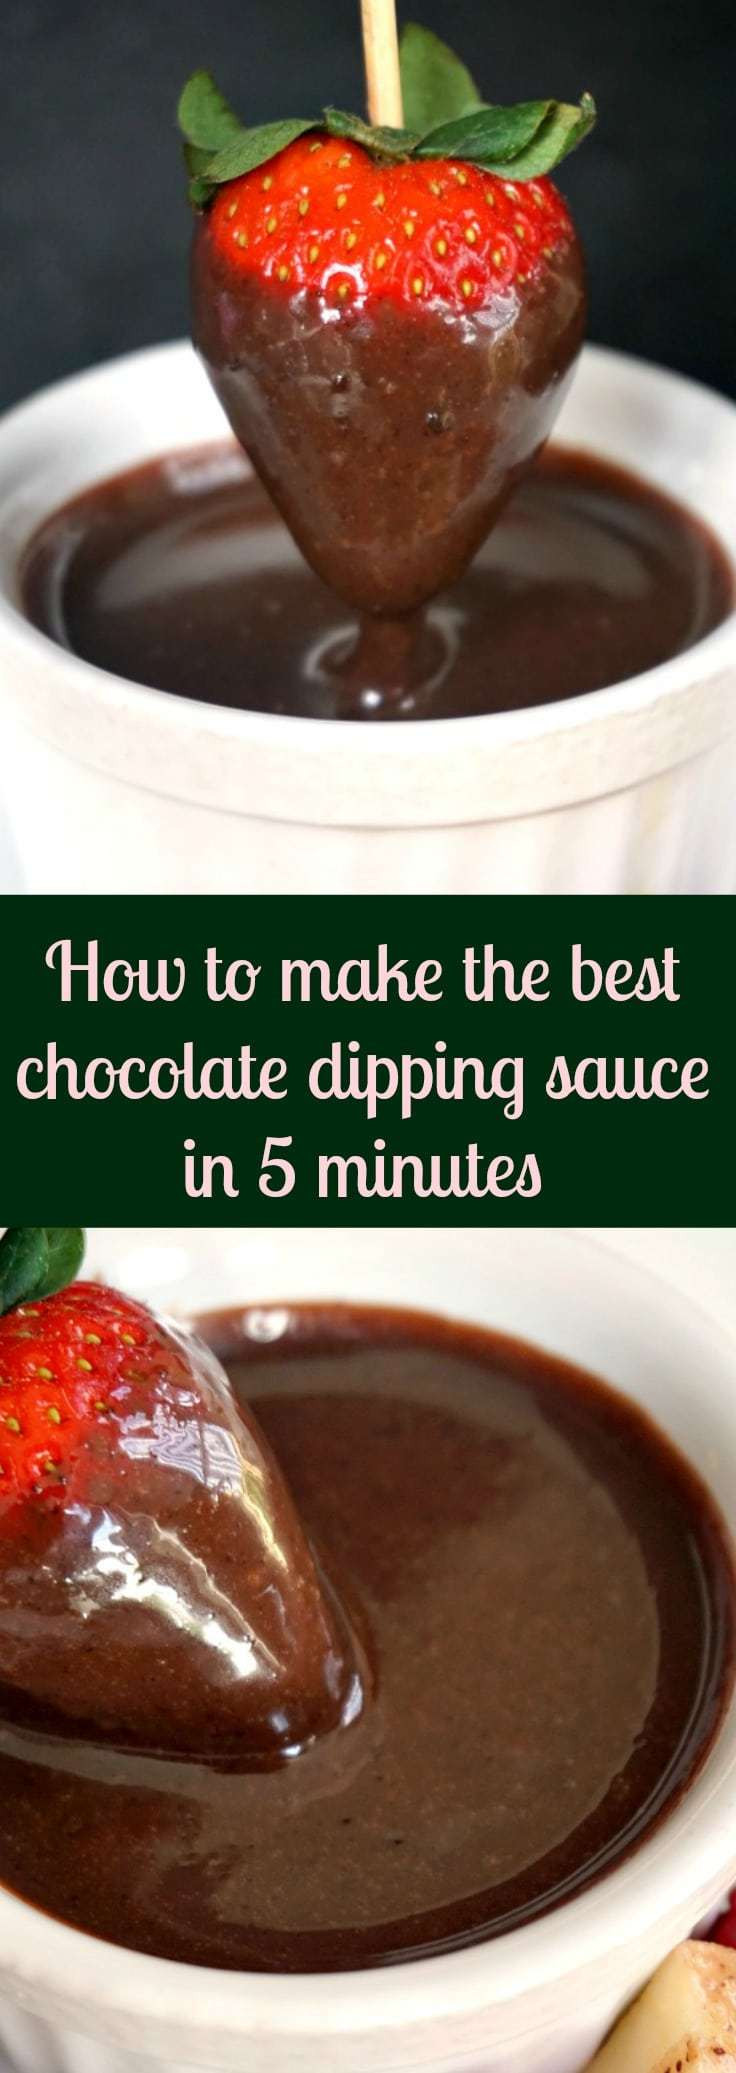 How To Make Chocolate Sauce
 How to make chocolate dipping sauce in 5 minutes